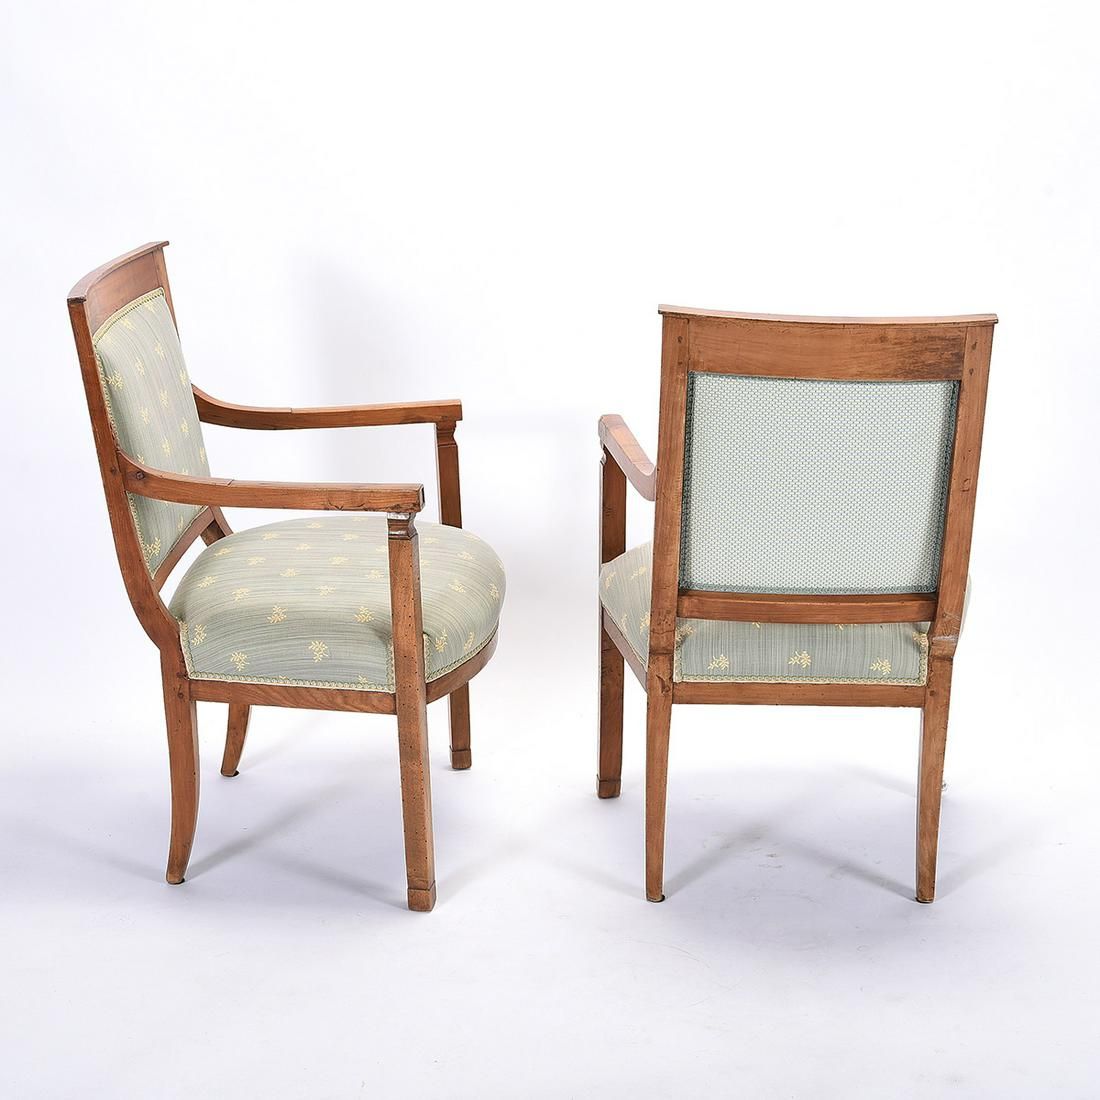 AF2-242: ANTIQUE PAIR OF EARLY 19TH CENTURY FRENCH DIRECTOIRE FRUITWOOD FAUTEUIL ARMCHAIRS